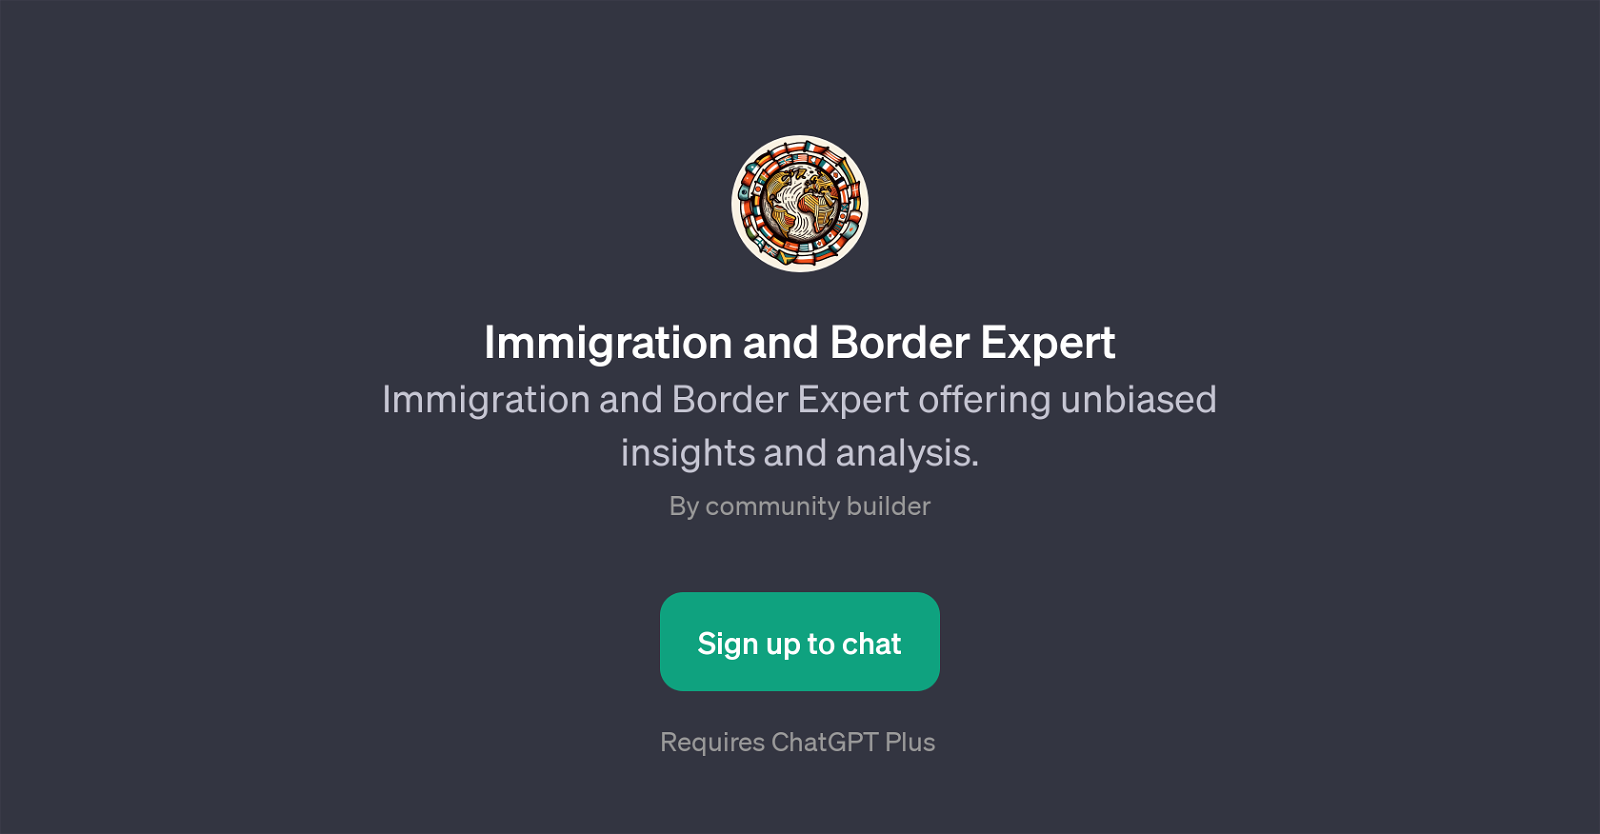 Immigration and Border Expert website